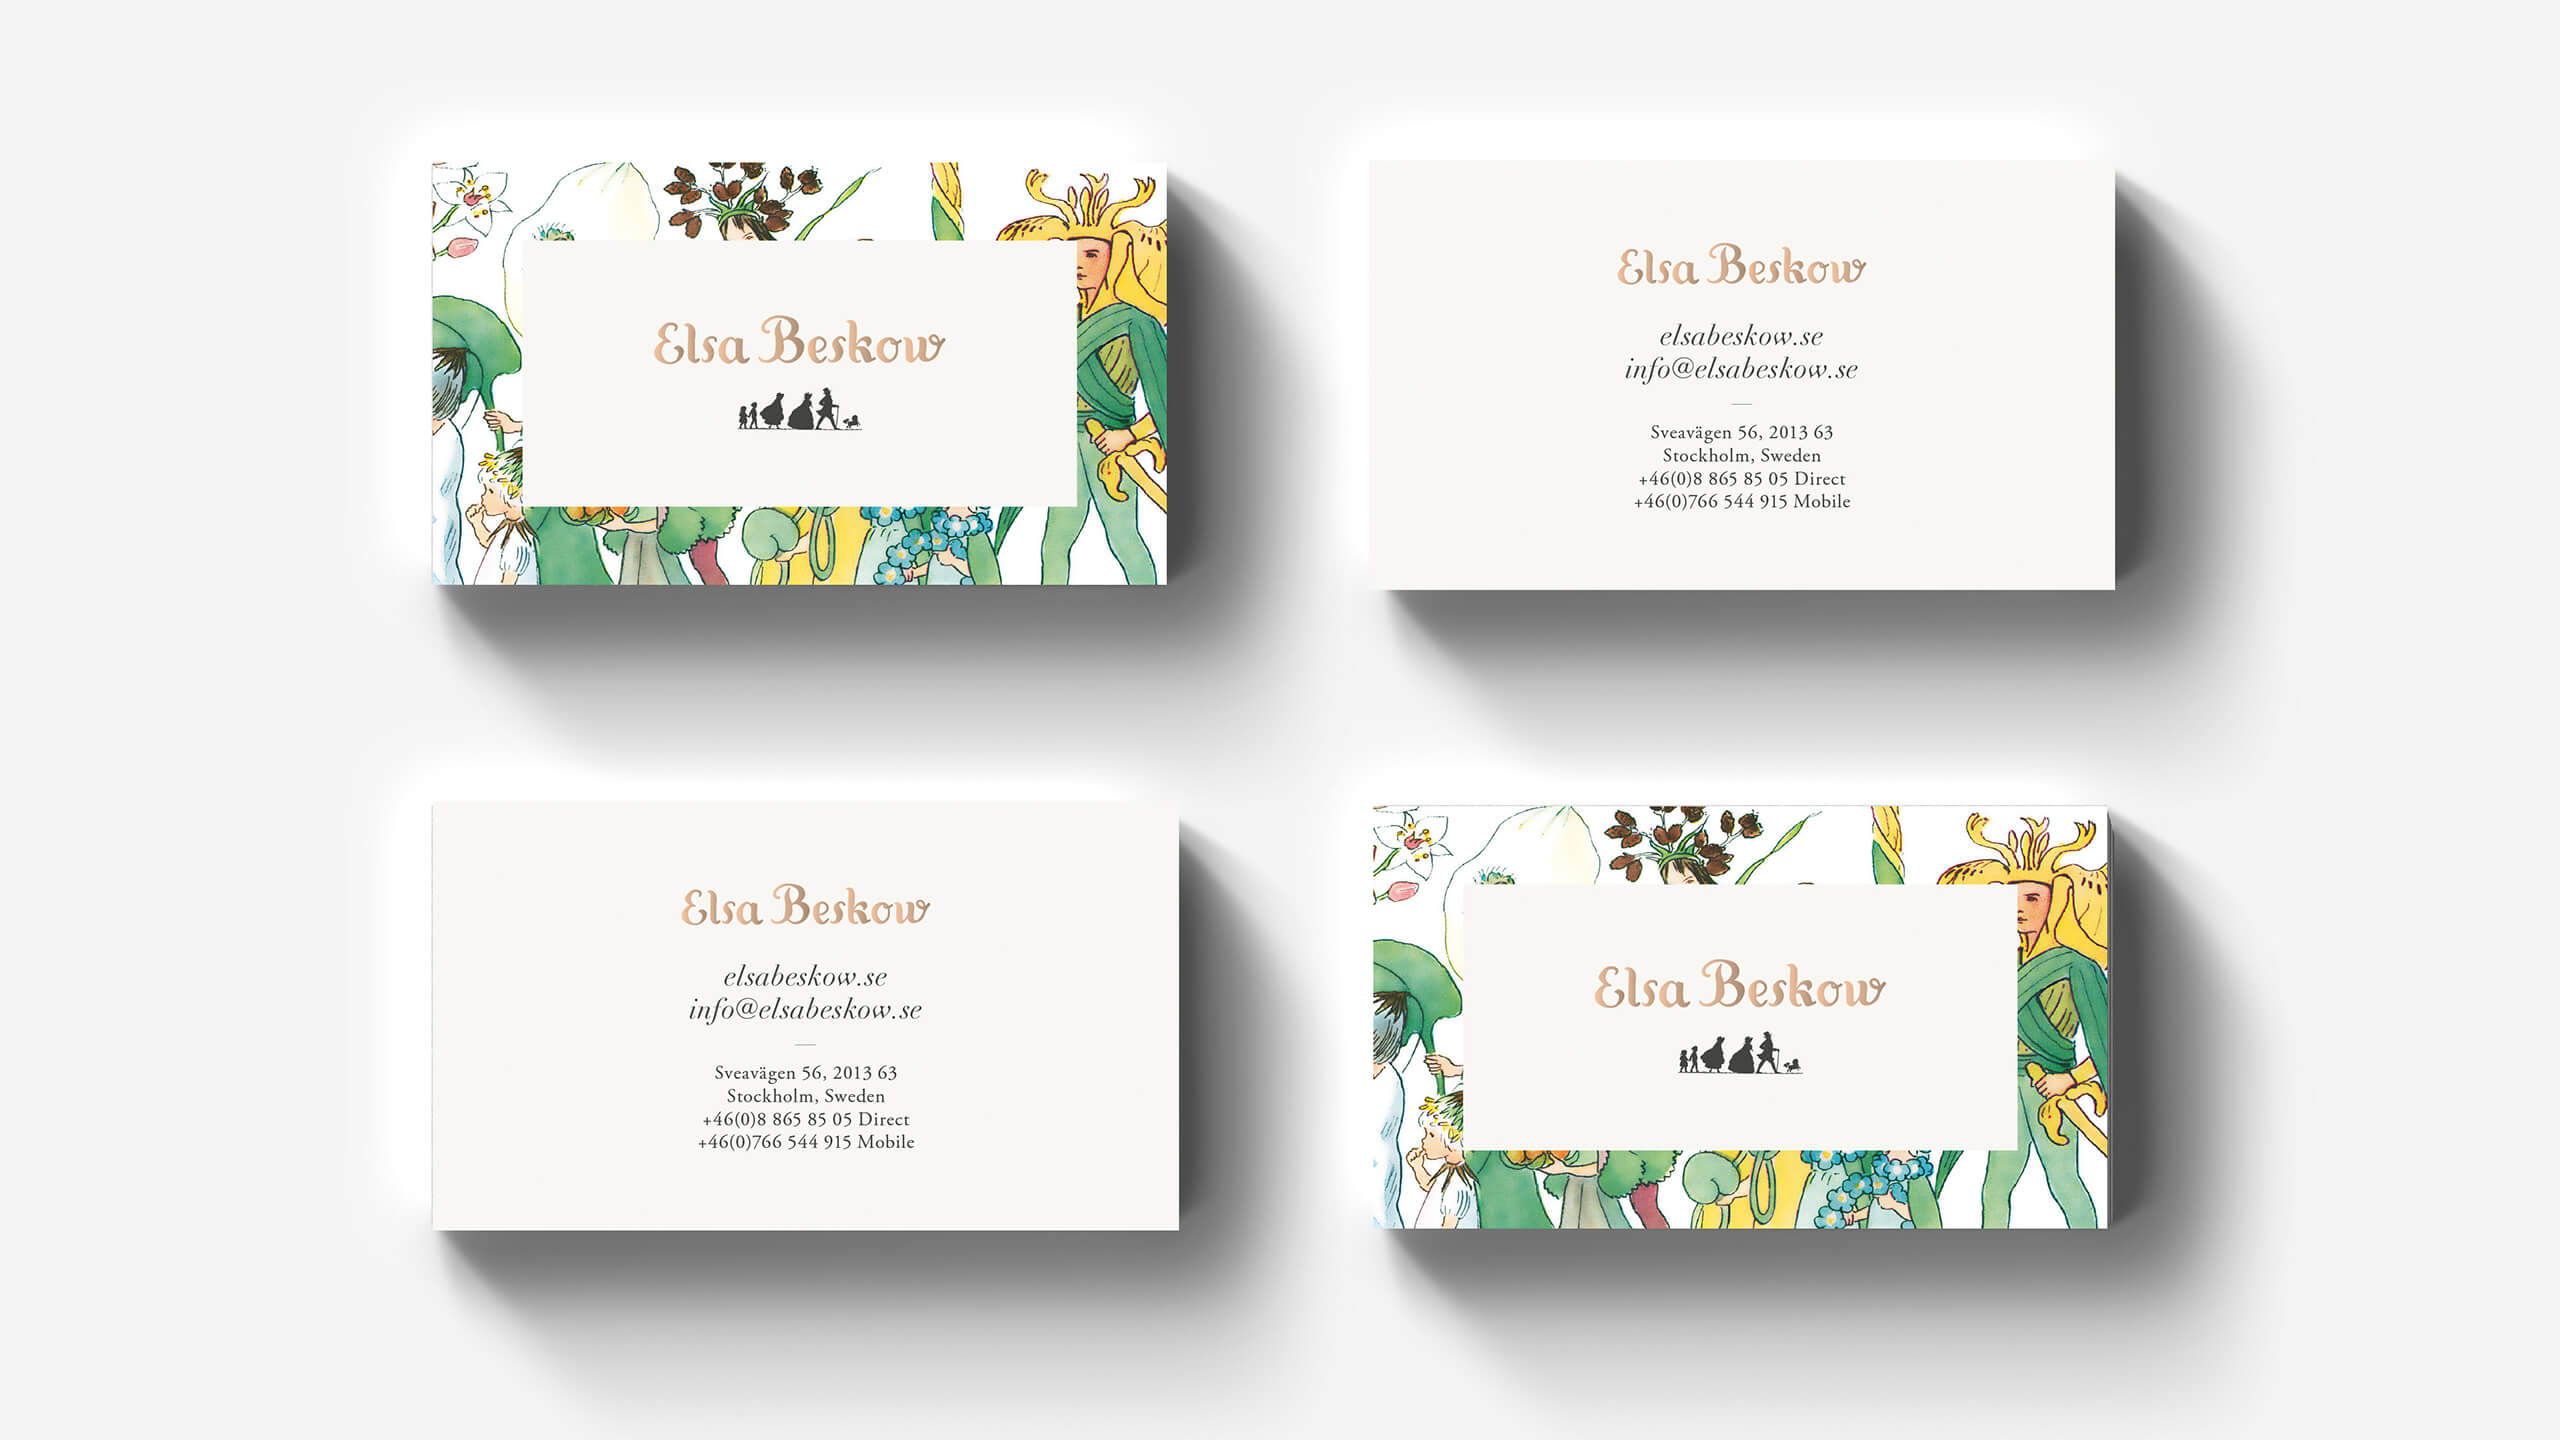 Beskow business cards